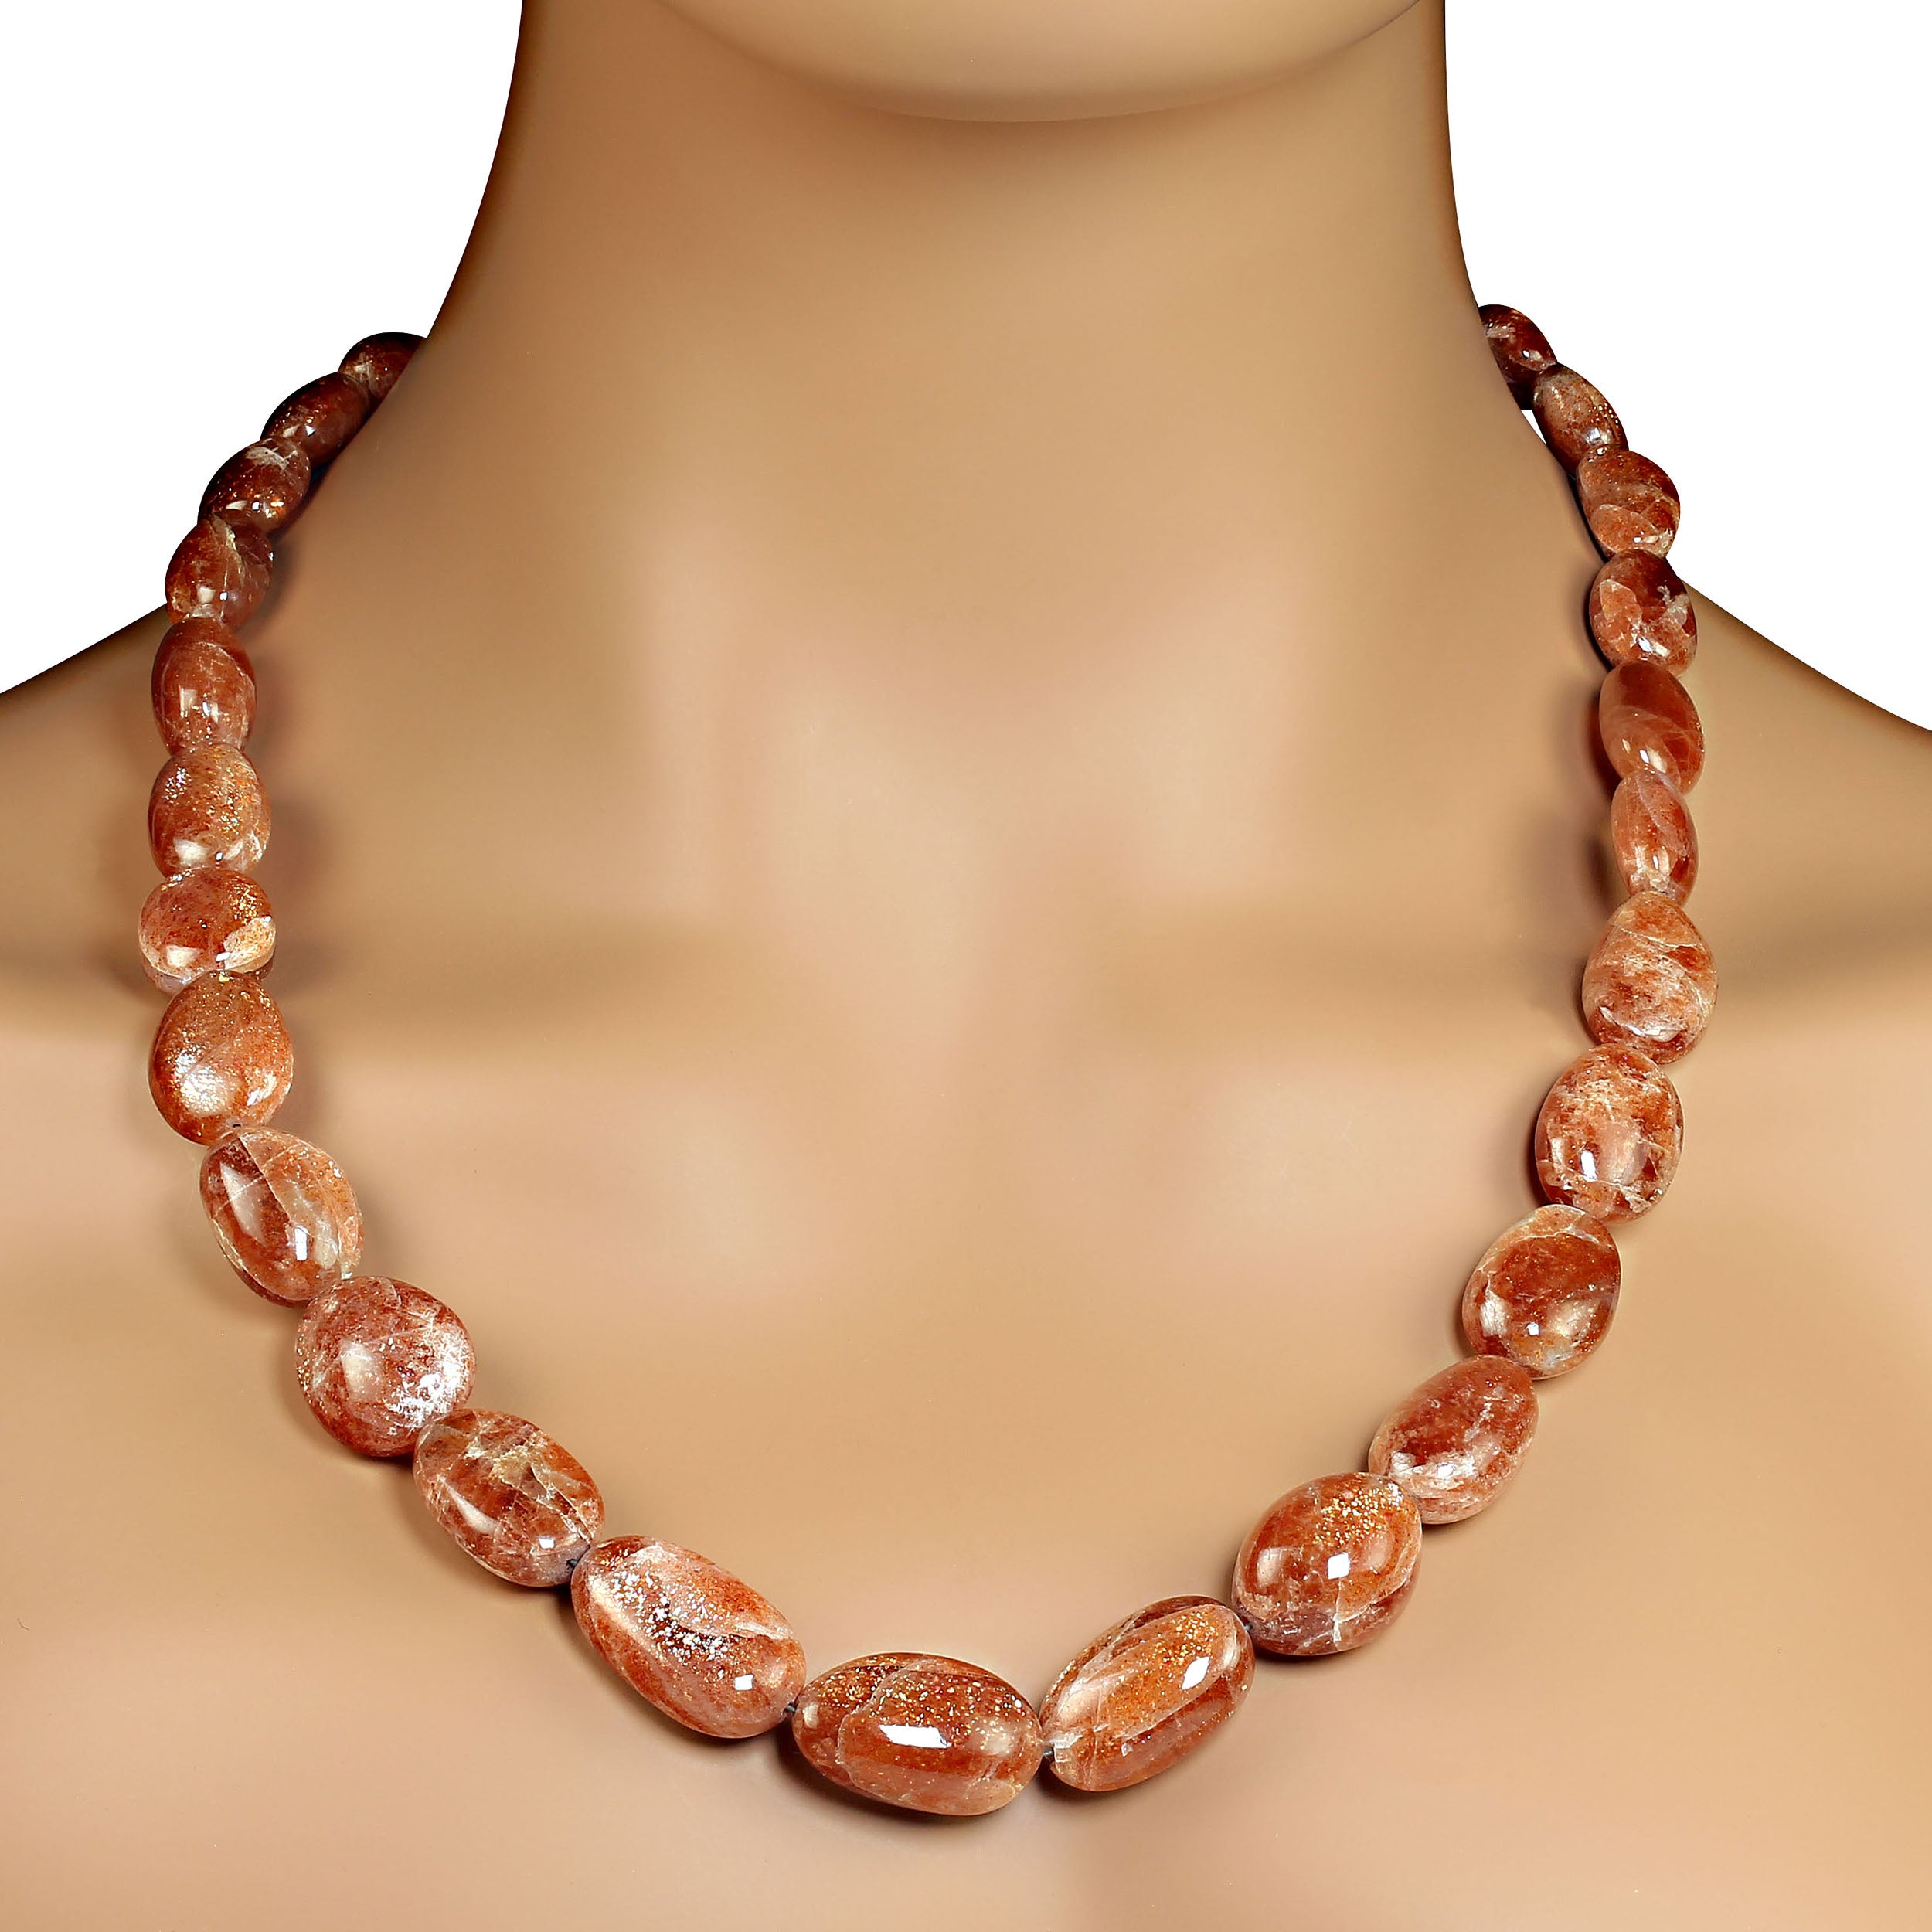 AJD Glorious Graduated 21-inch African Sunstone Necklace    Perfect Gift! For Sale